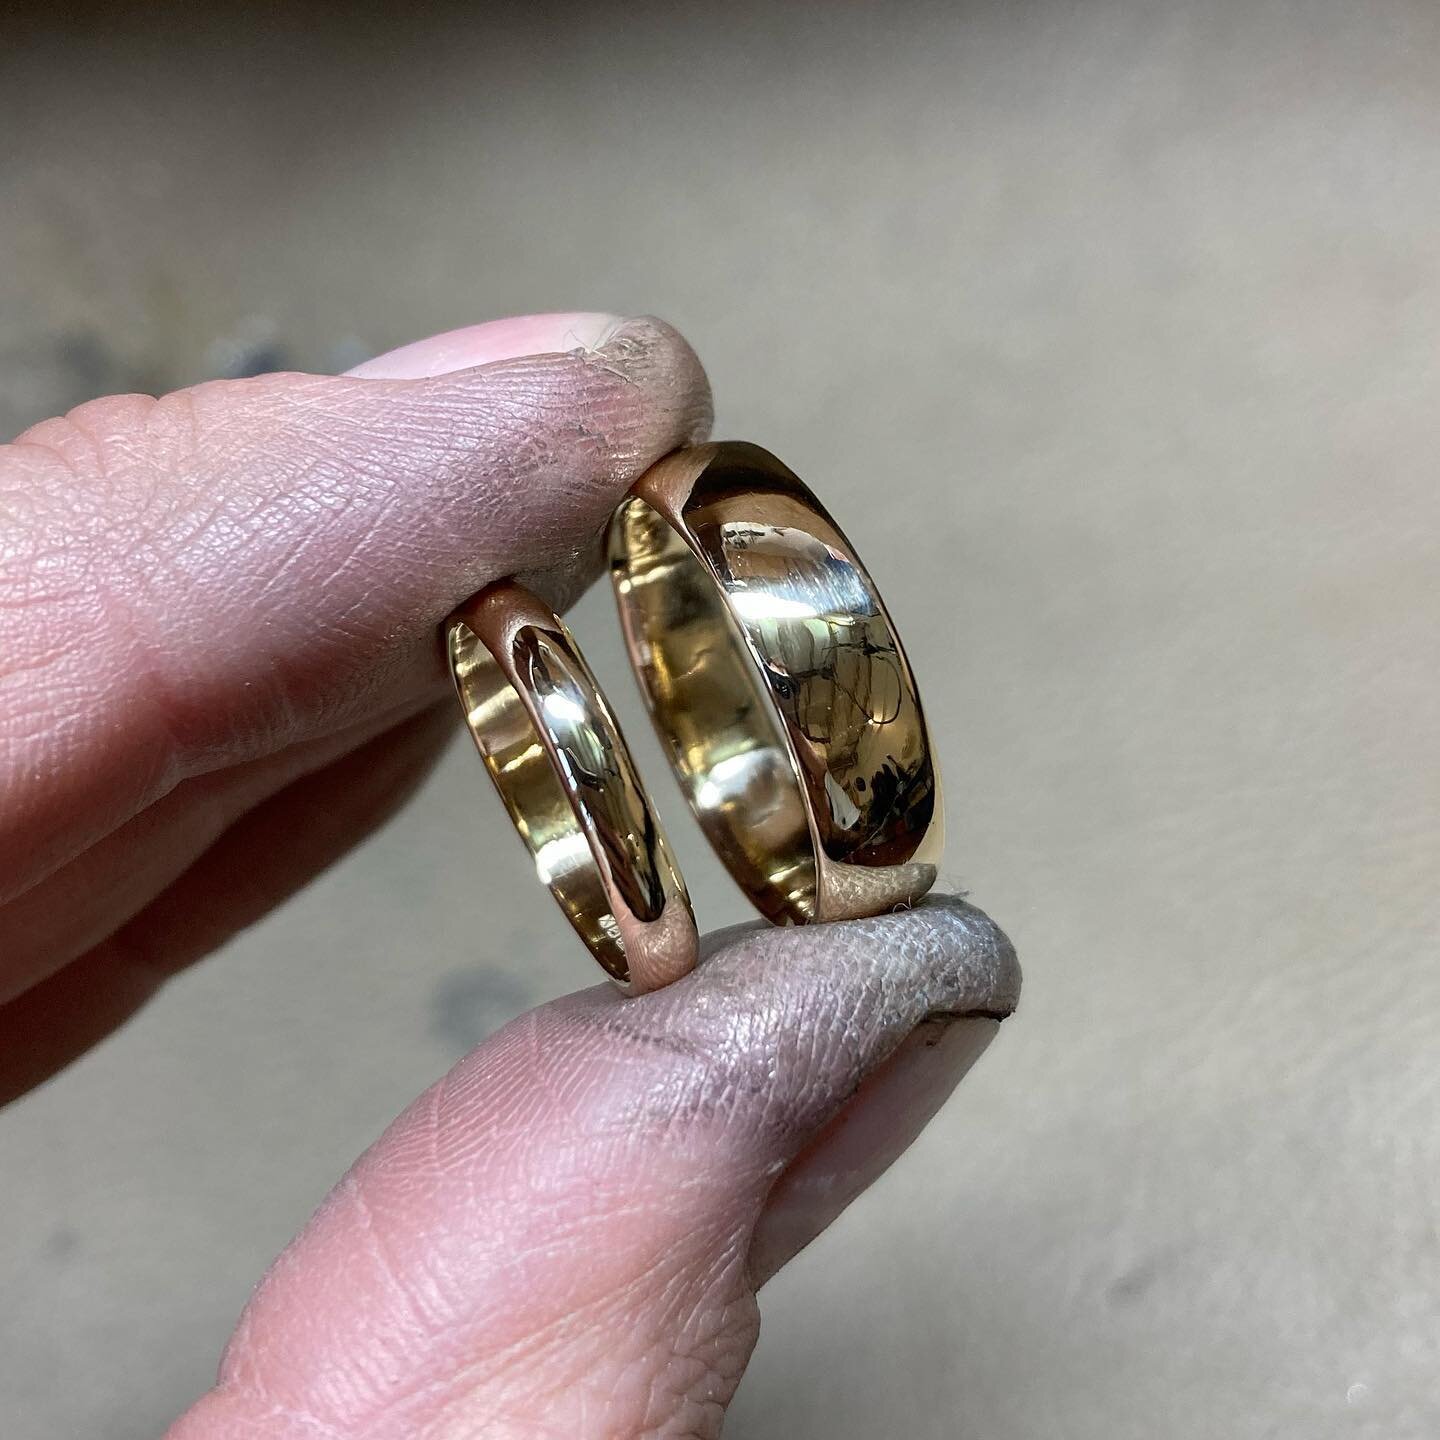 I do love how reusable gold is. These two were made a while back from my client&rsquo;s inherited gold. Melt it down, rework it and before long you&rsquo;ve got a pair of stunningly bright and shiny wedding rings that not only fit perfectly, but are 